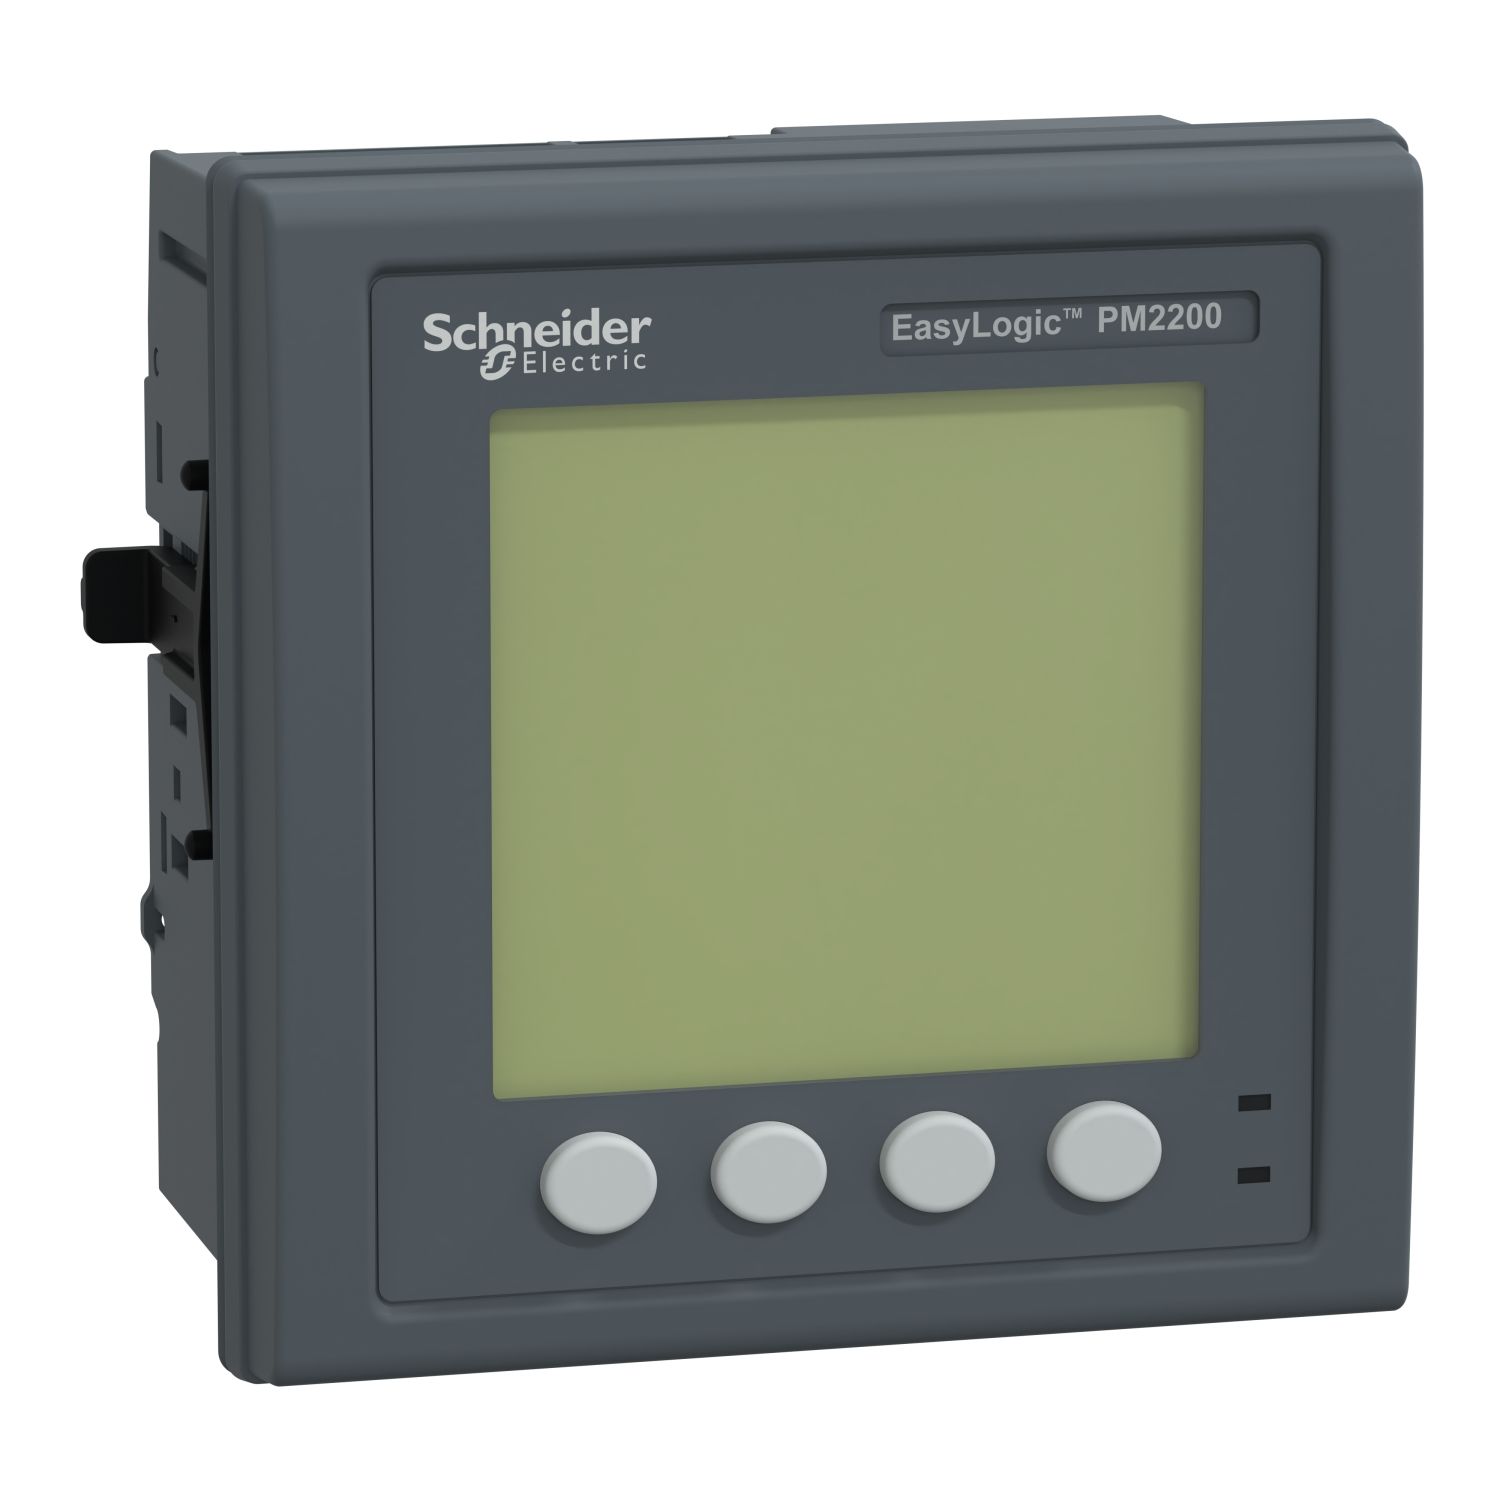 METSEPM2230 EasyLogic PM2230, Power & Energy meter, up to the 31st harmonic, LCD display, RS485, class 0.5S